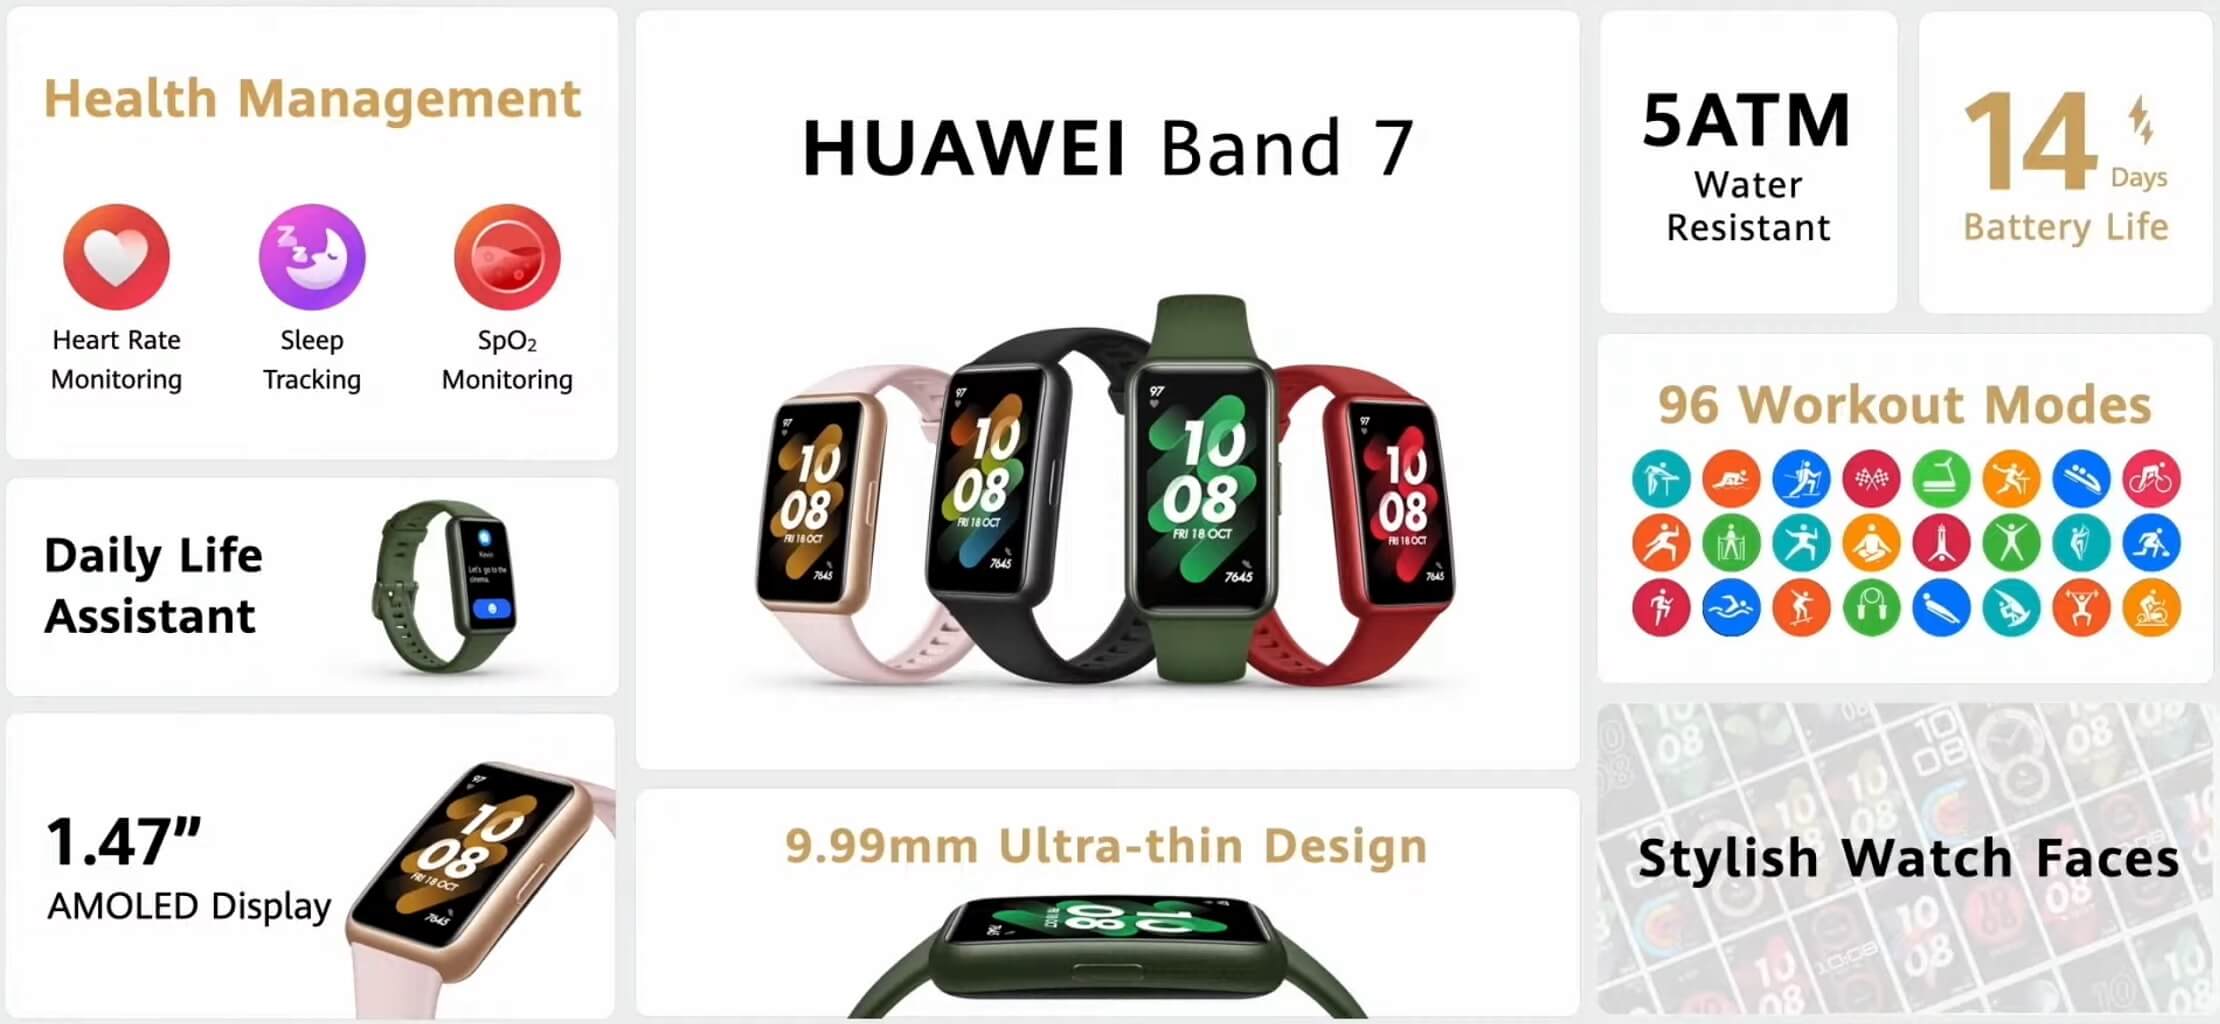 Huawei band 7 features Global